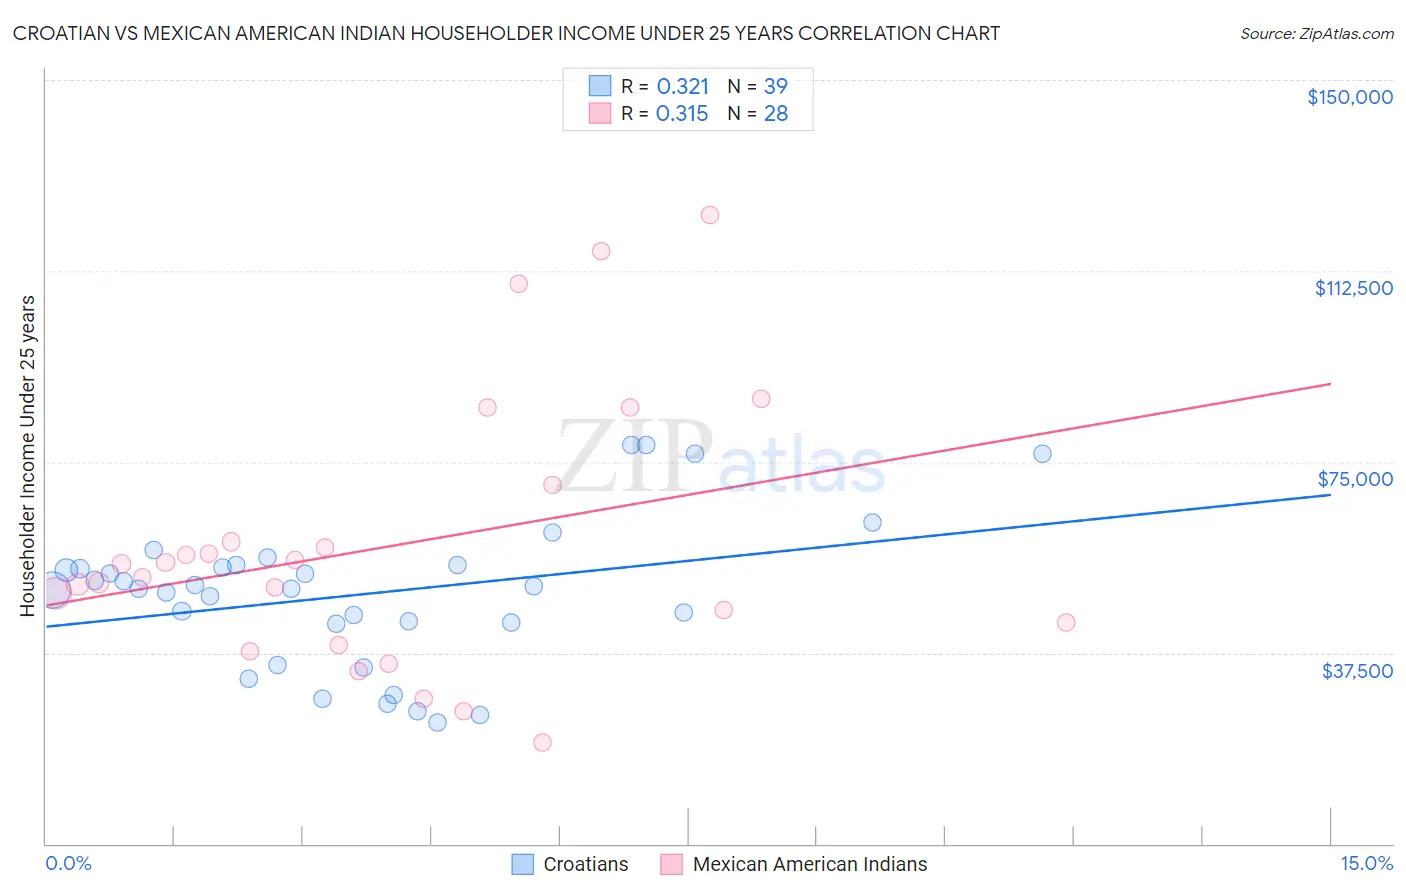 Croatian vs Mexican American Indian Householder Income Under 25 years